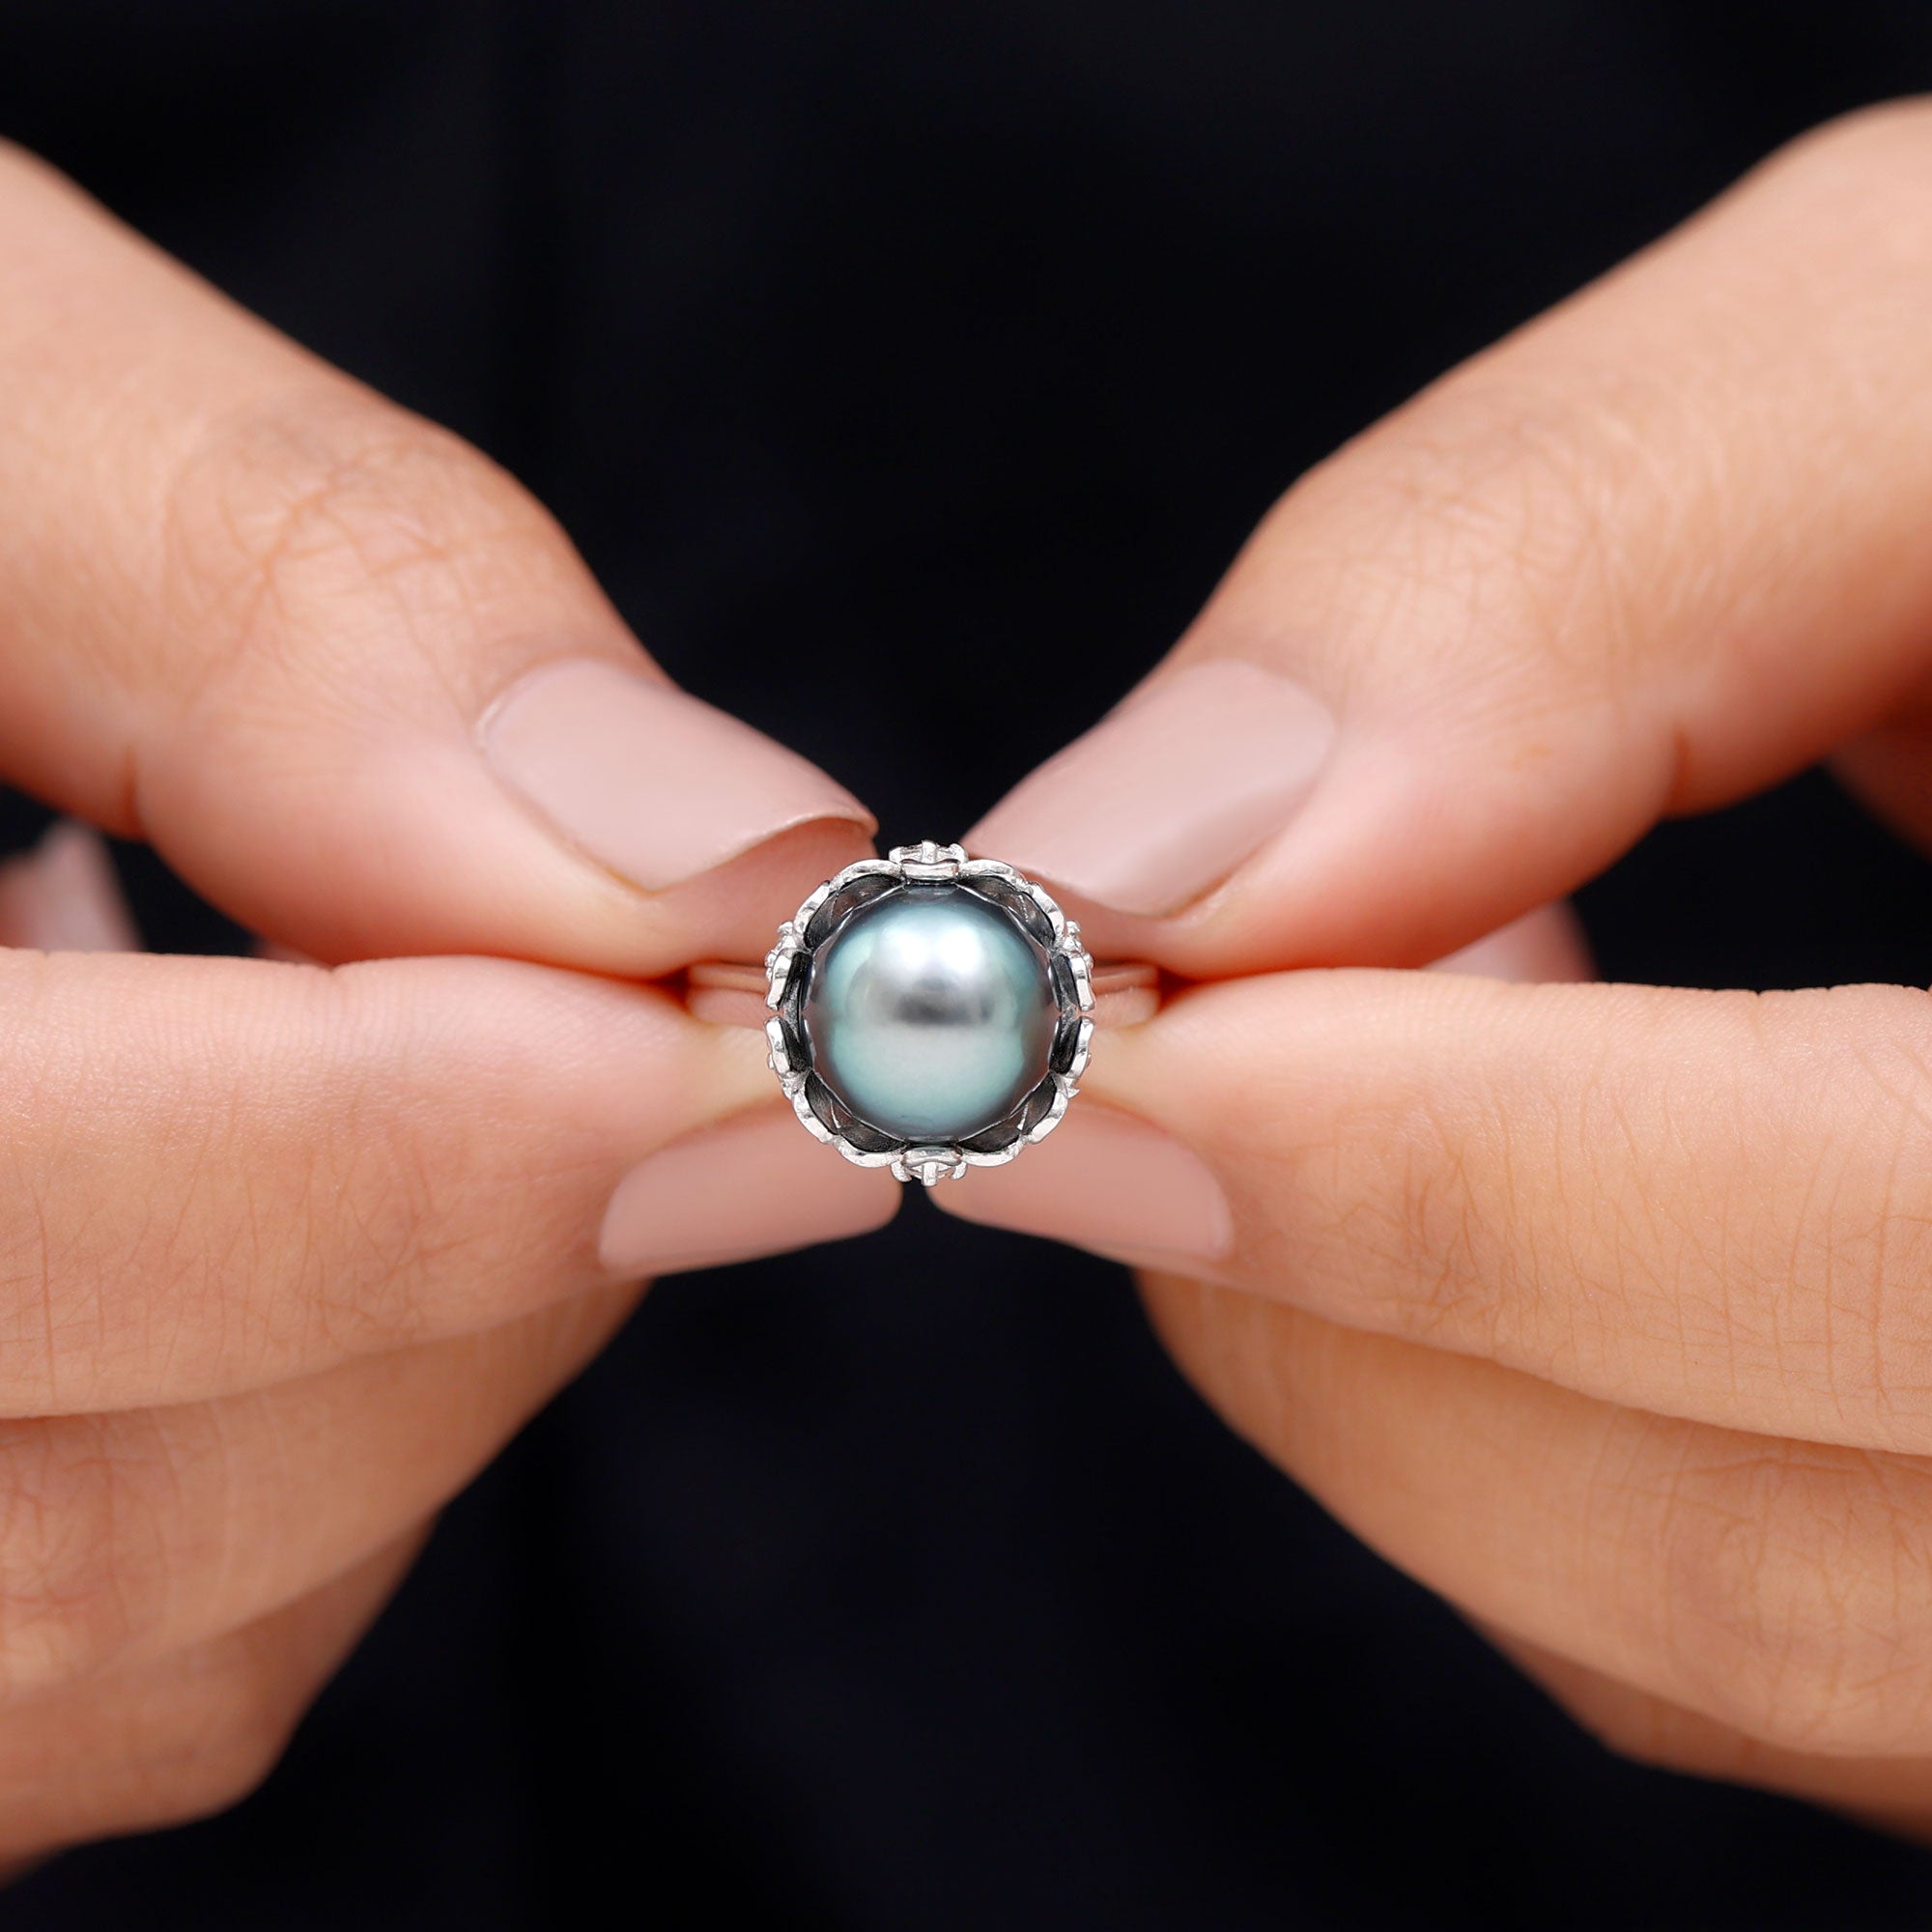 Tahitian Pearl and Diamond Solitaire Ring with Floral setting Tahitian pearl - ( AAA ) - Quality - Rosec Jewels